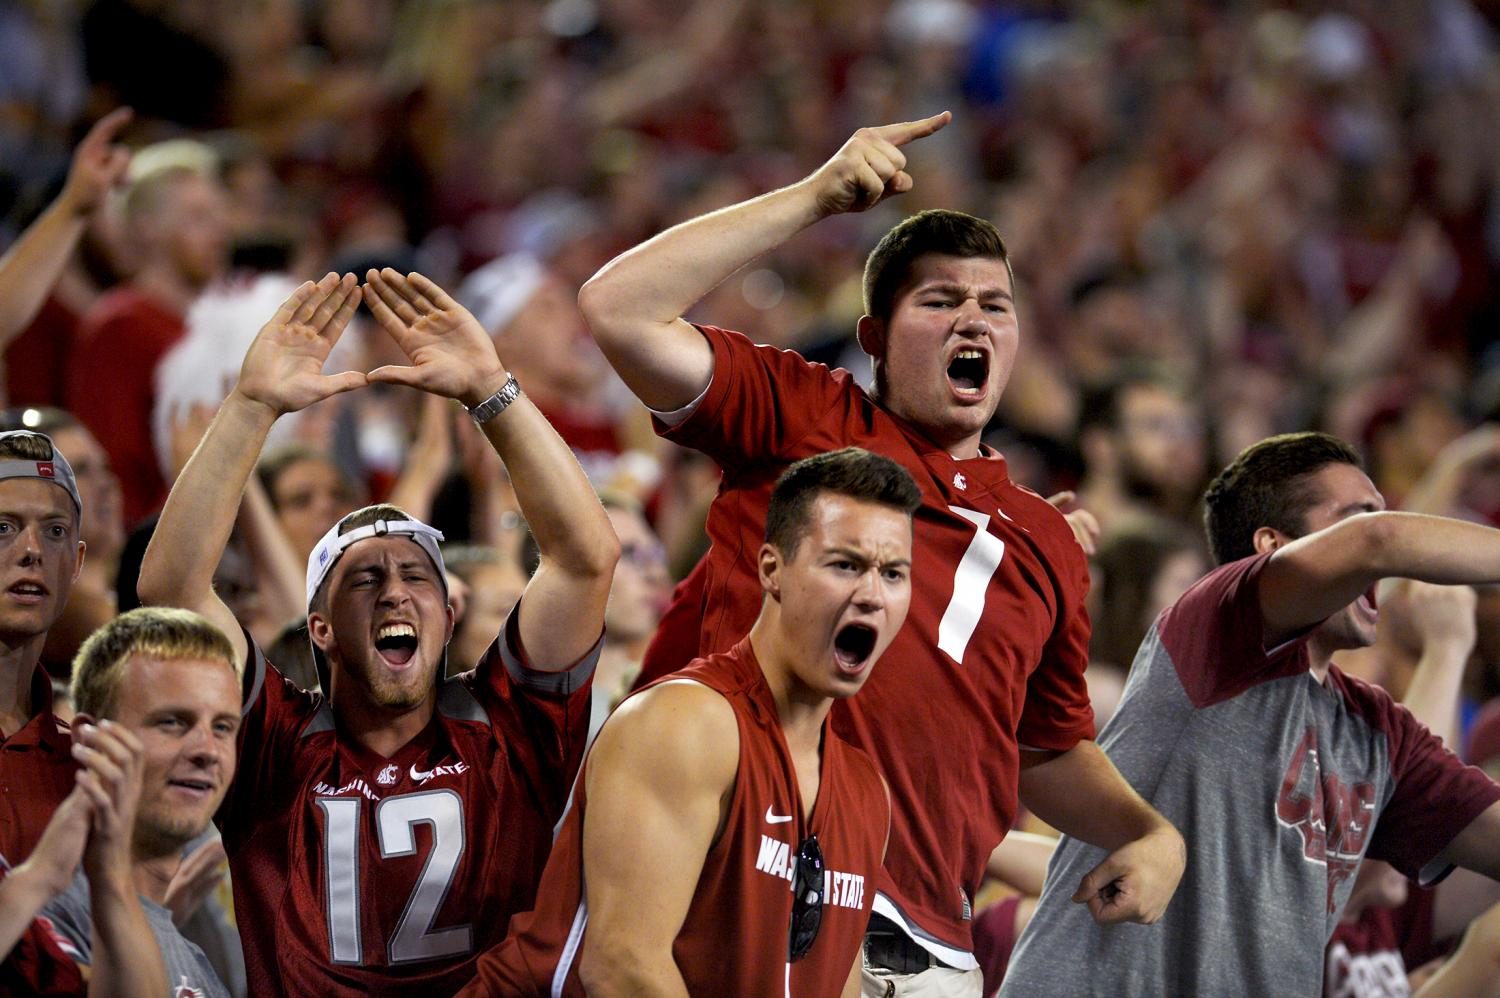 WSU fans passionately support the team during the 3 OT drama against BSU on Saturday, September 9.